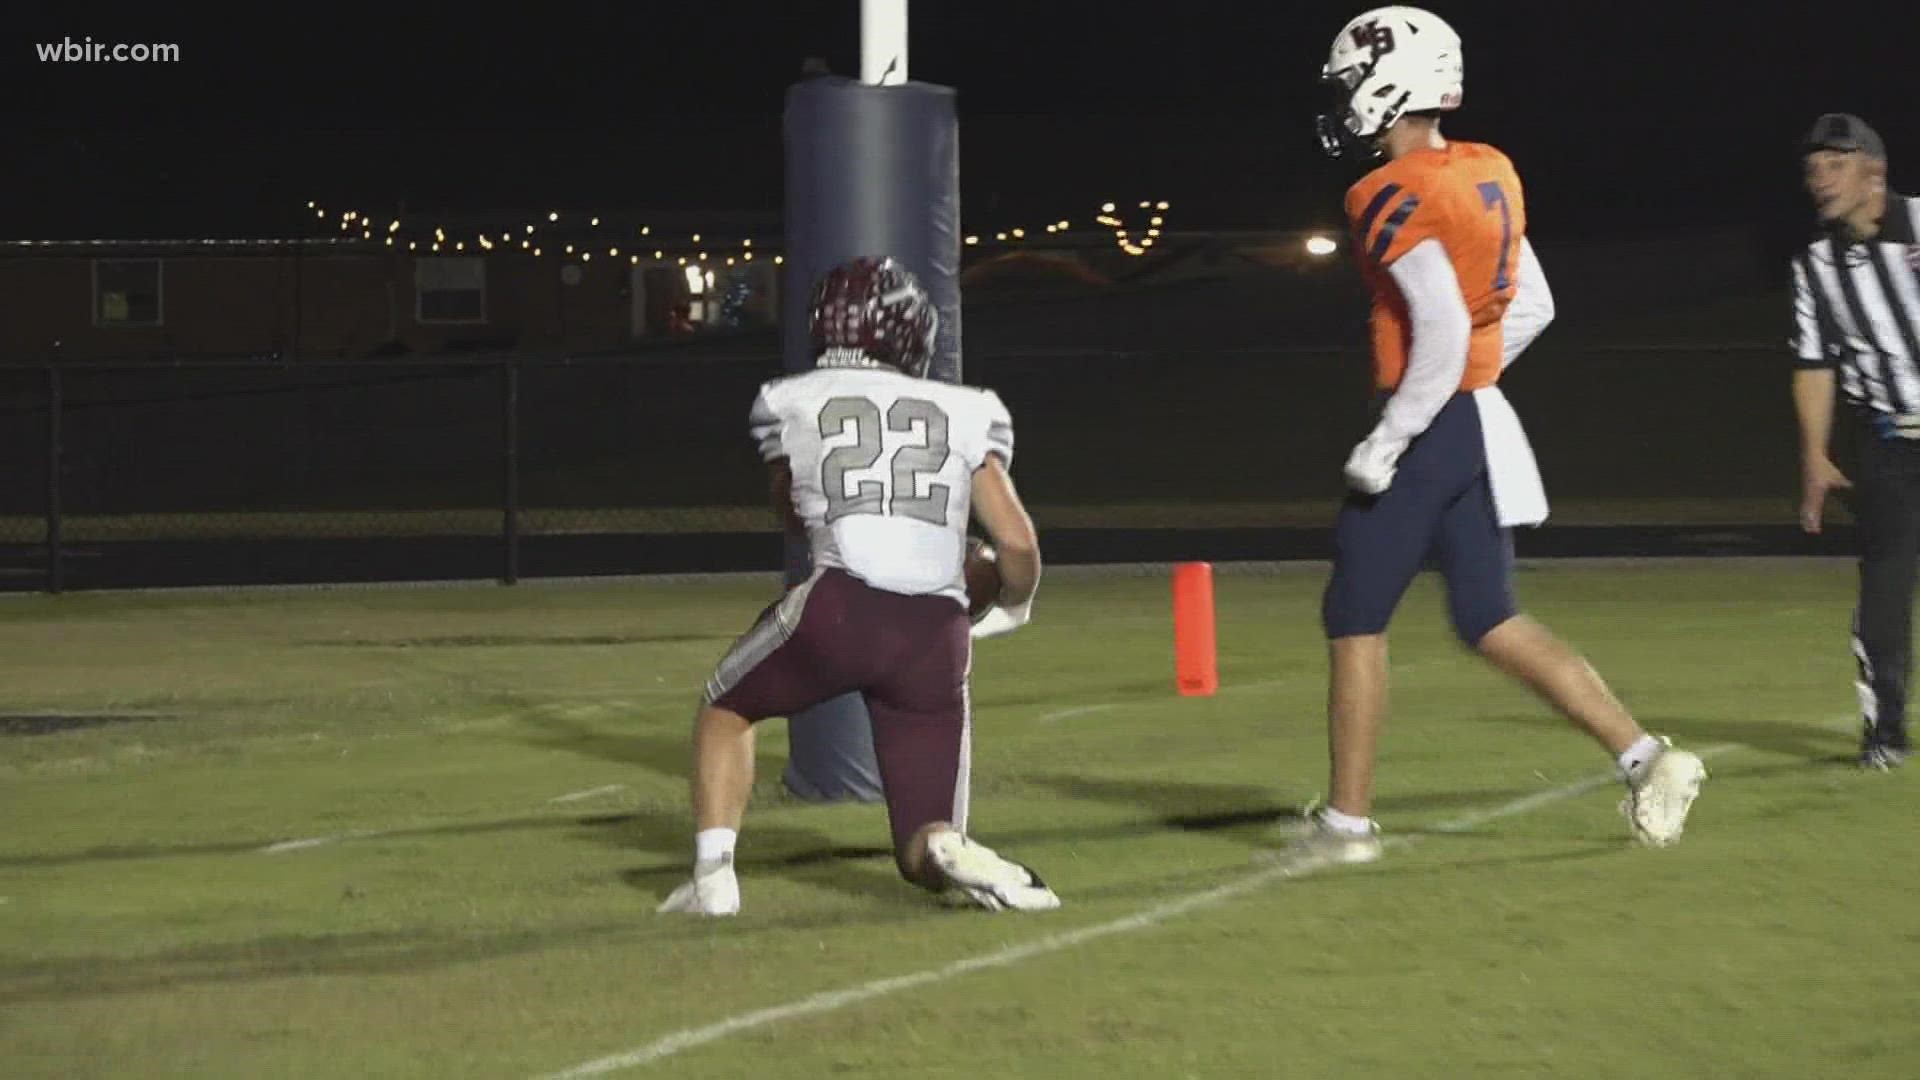 Dobyns-Bennett takes care of business, knocking off William Blount in week 9.